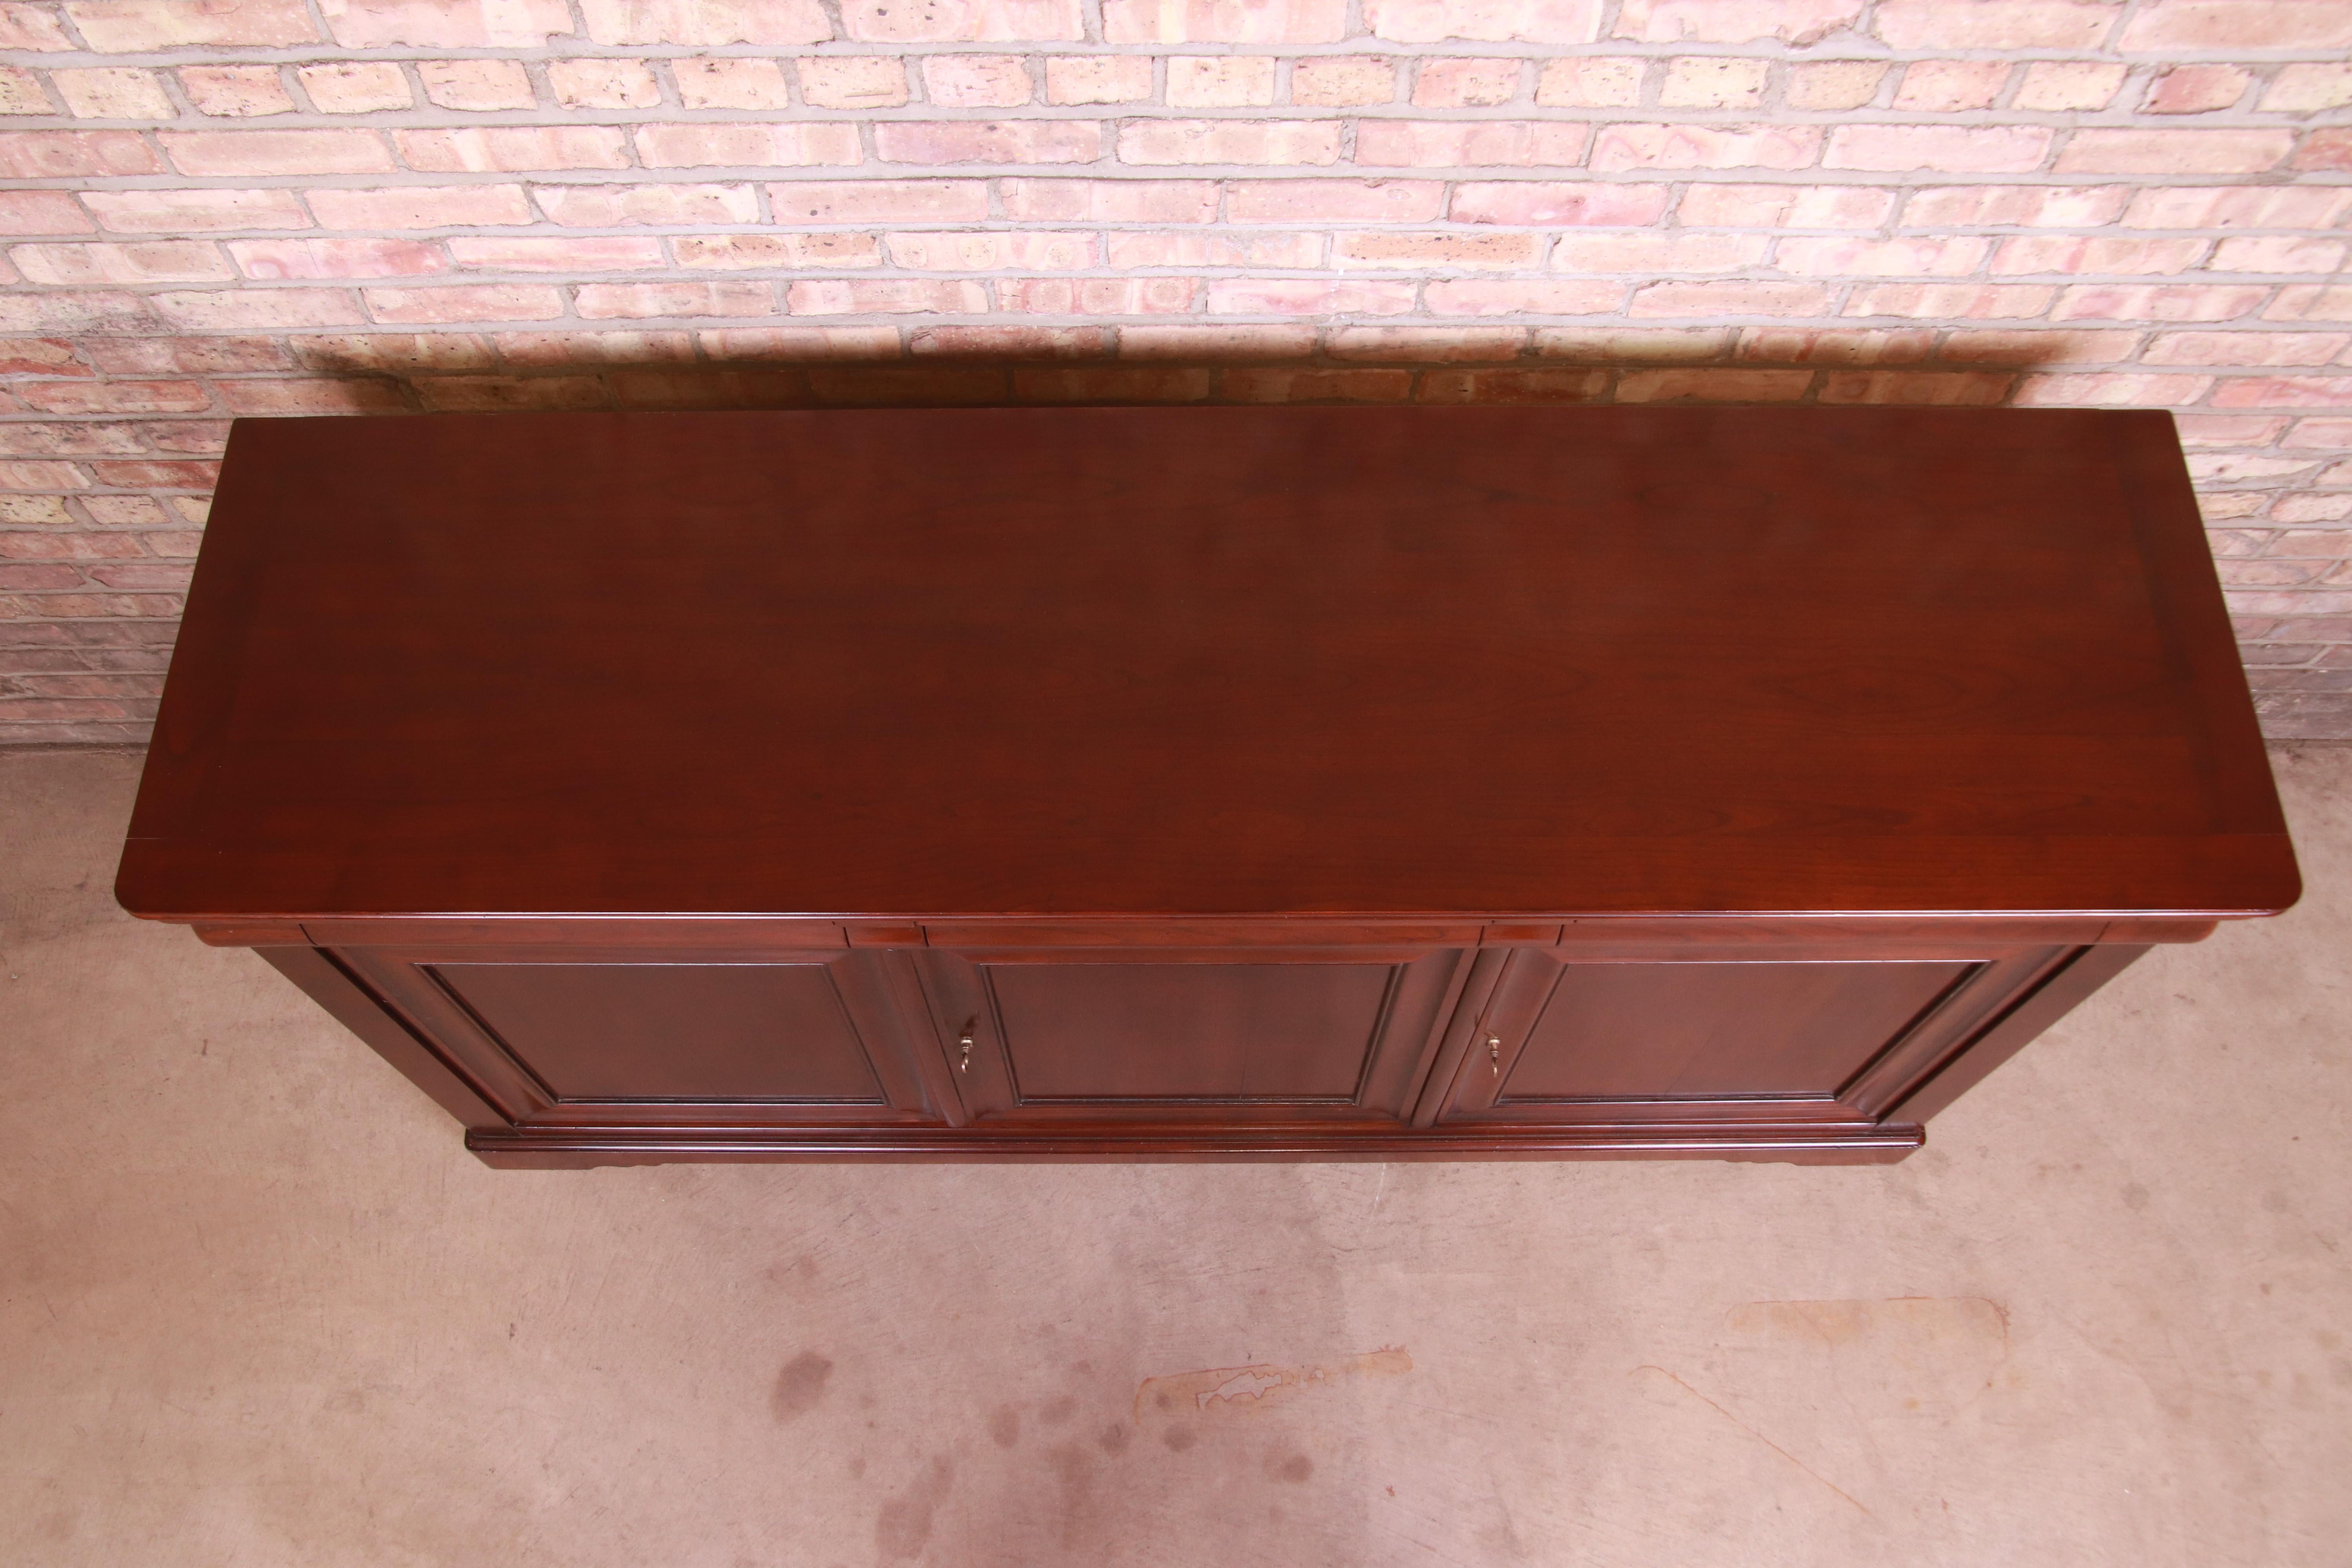 Contemporary Grange French Provincial Cherry Wood Sideboard Credenza or Bar Cabinet